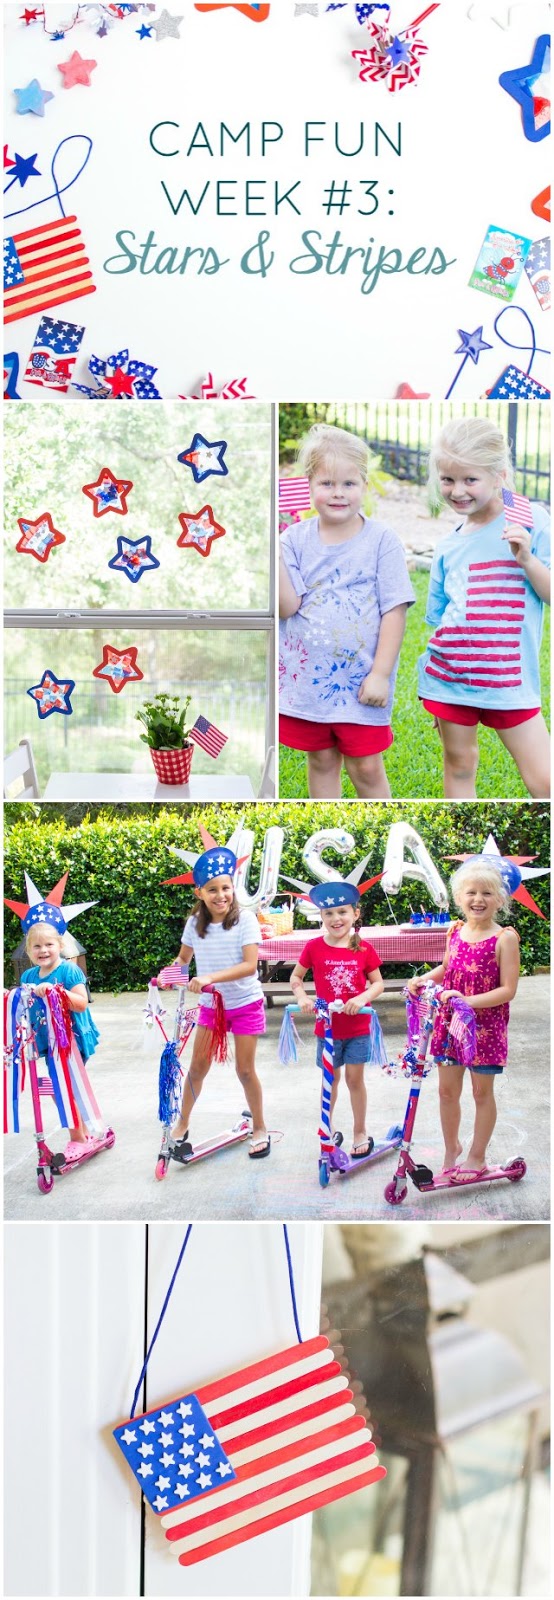 Camp Fun "Stars and Stripes" Week - check out these patriotic crafts and activities for summer camp at home with your kids!